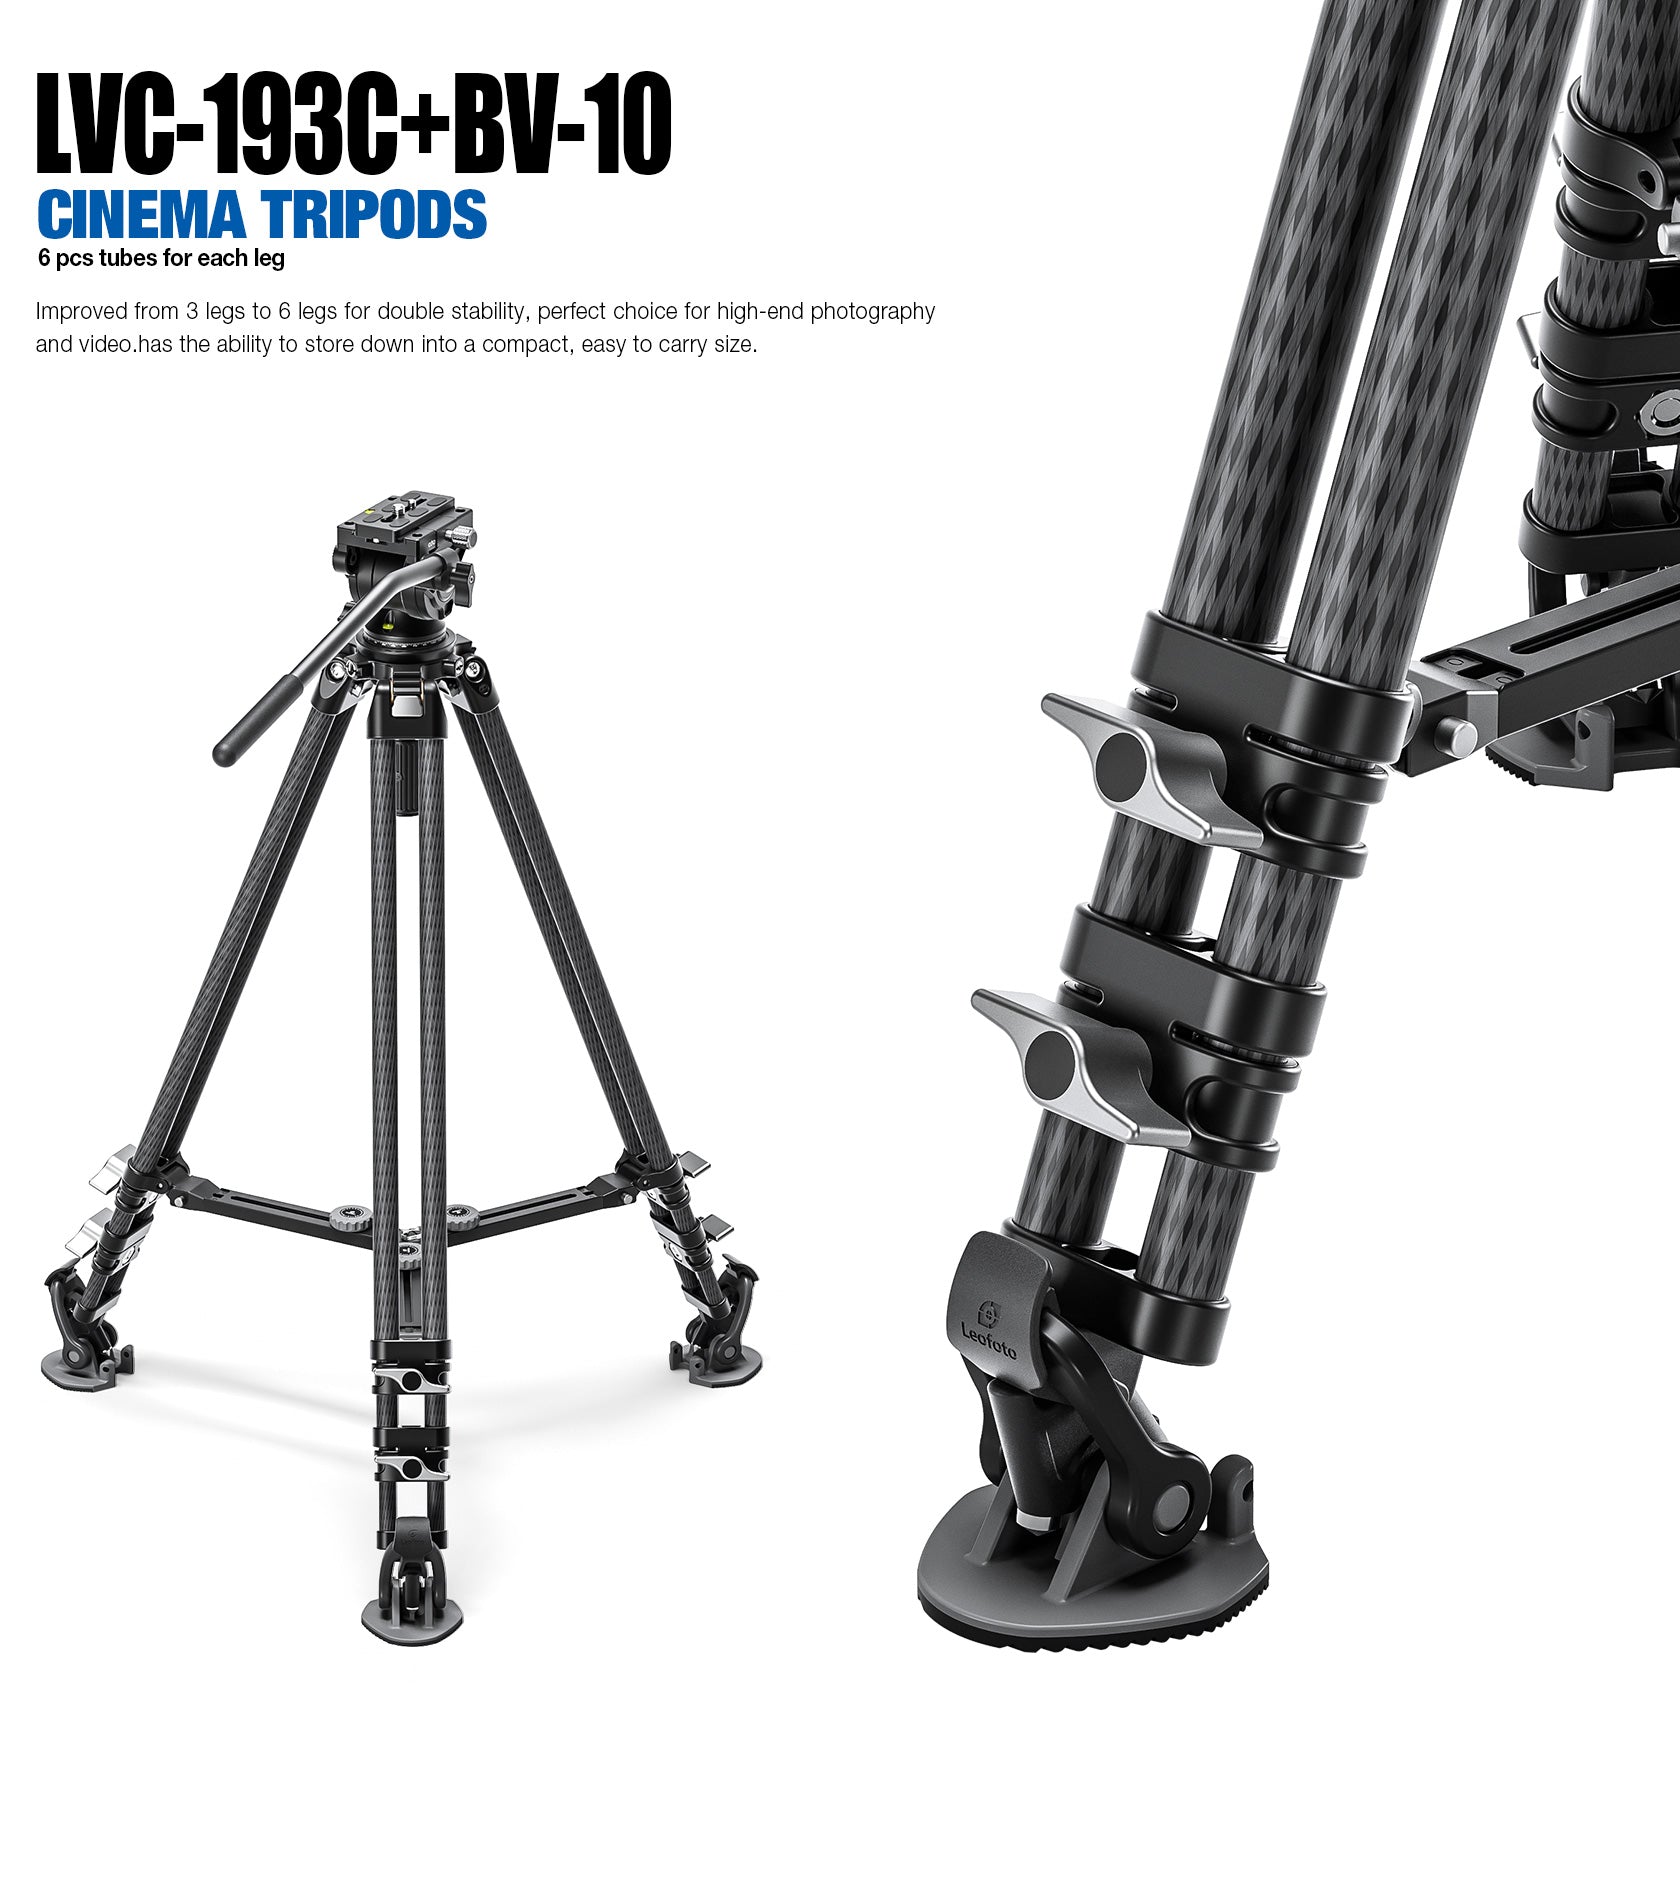 Leofoto LVC-193C+BV-10 Dual-Tube Video Tripod with Fluid Head Set  | 75mm Integrated Bowl with Leveling Base and Handle